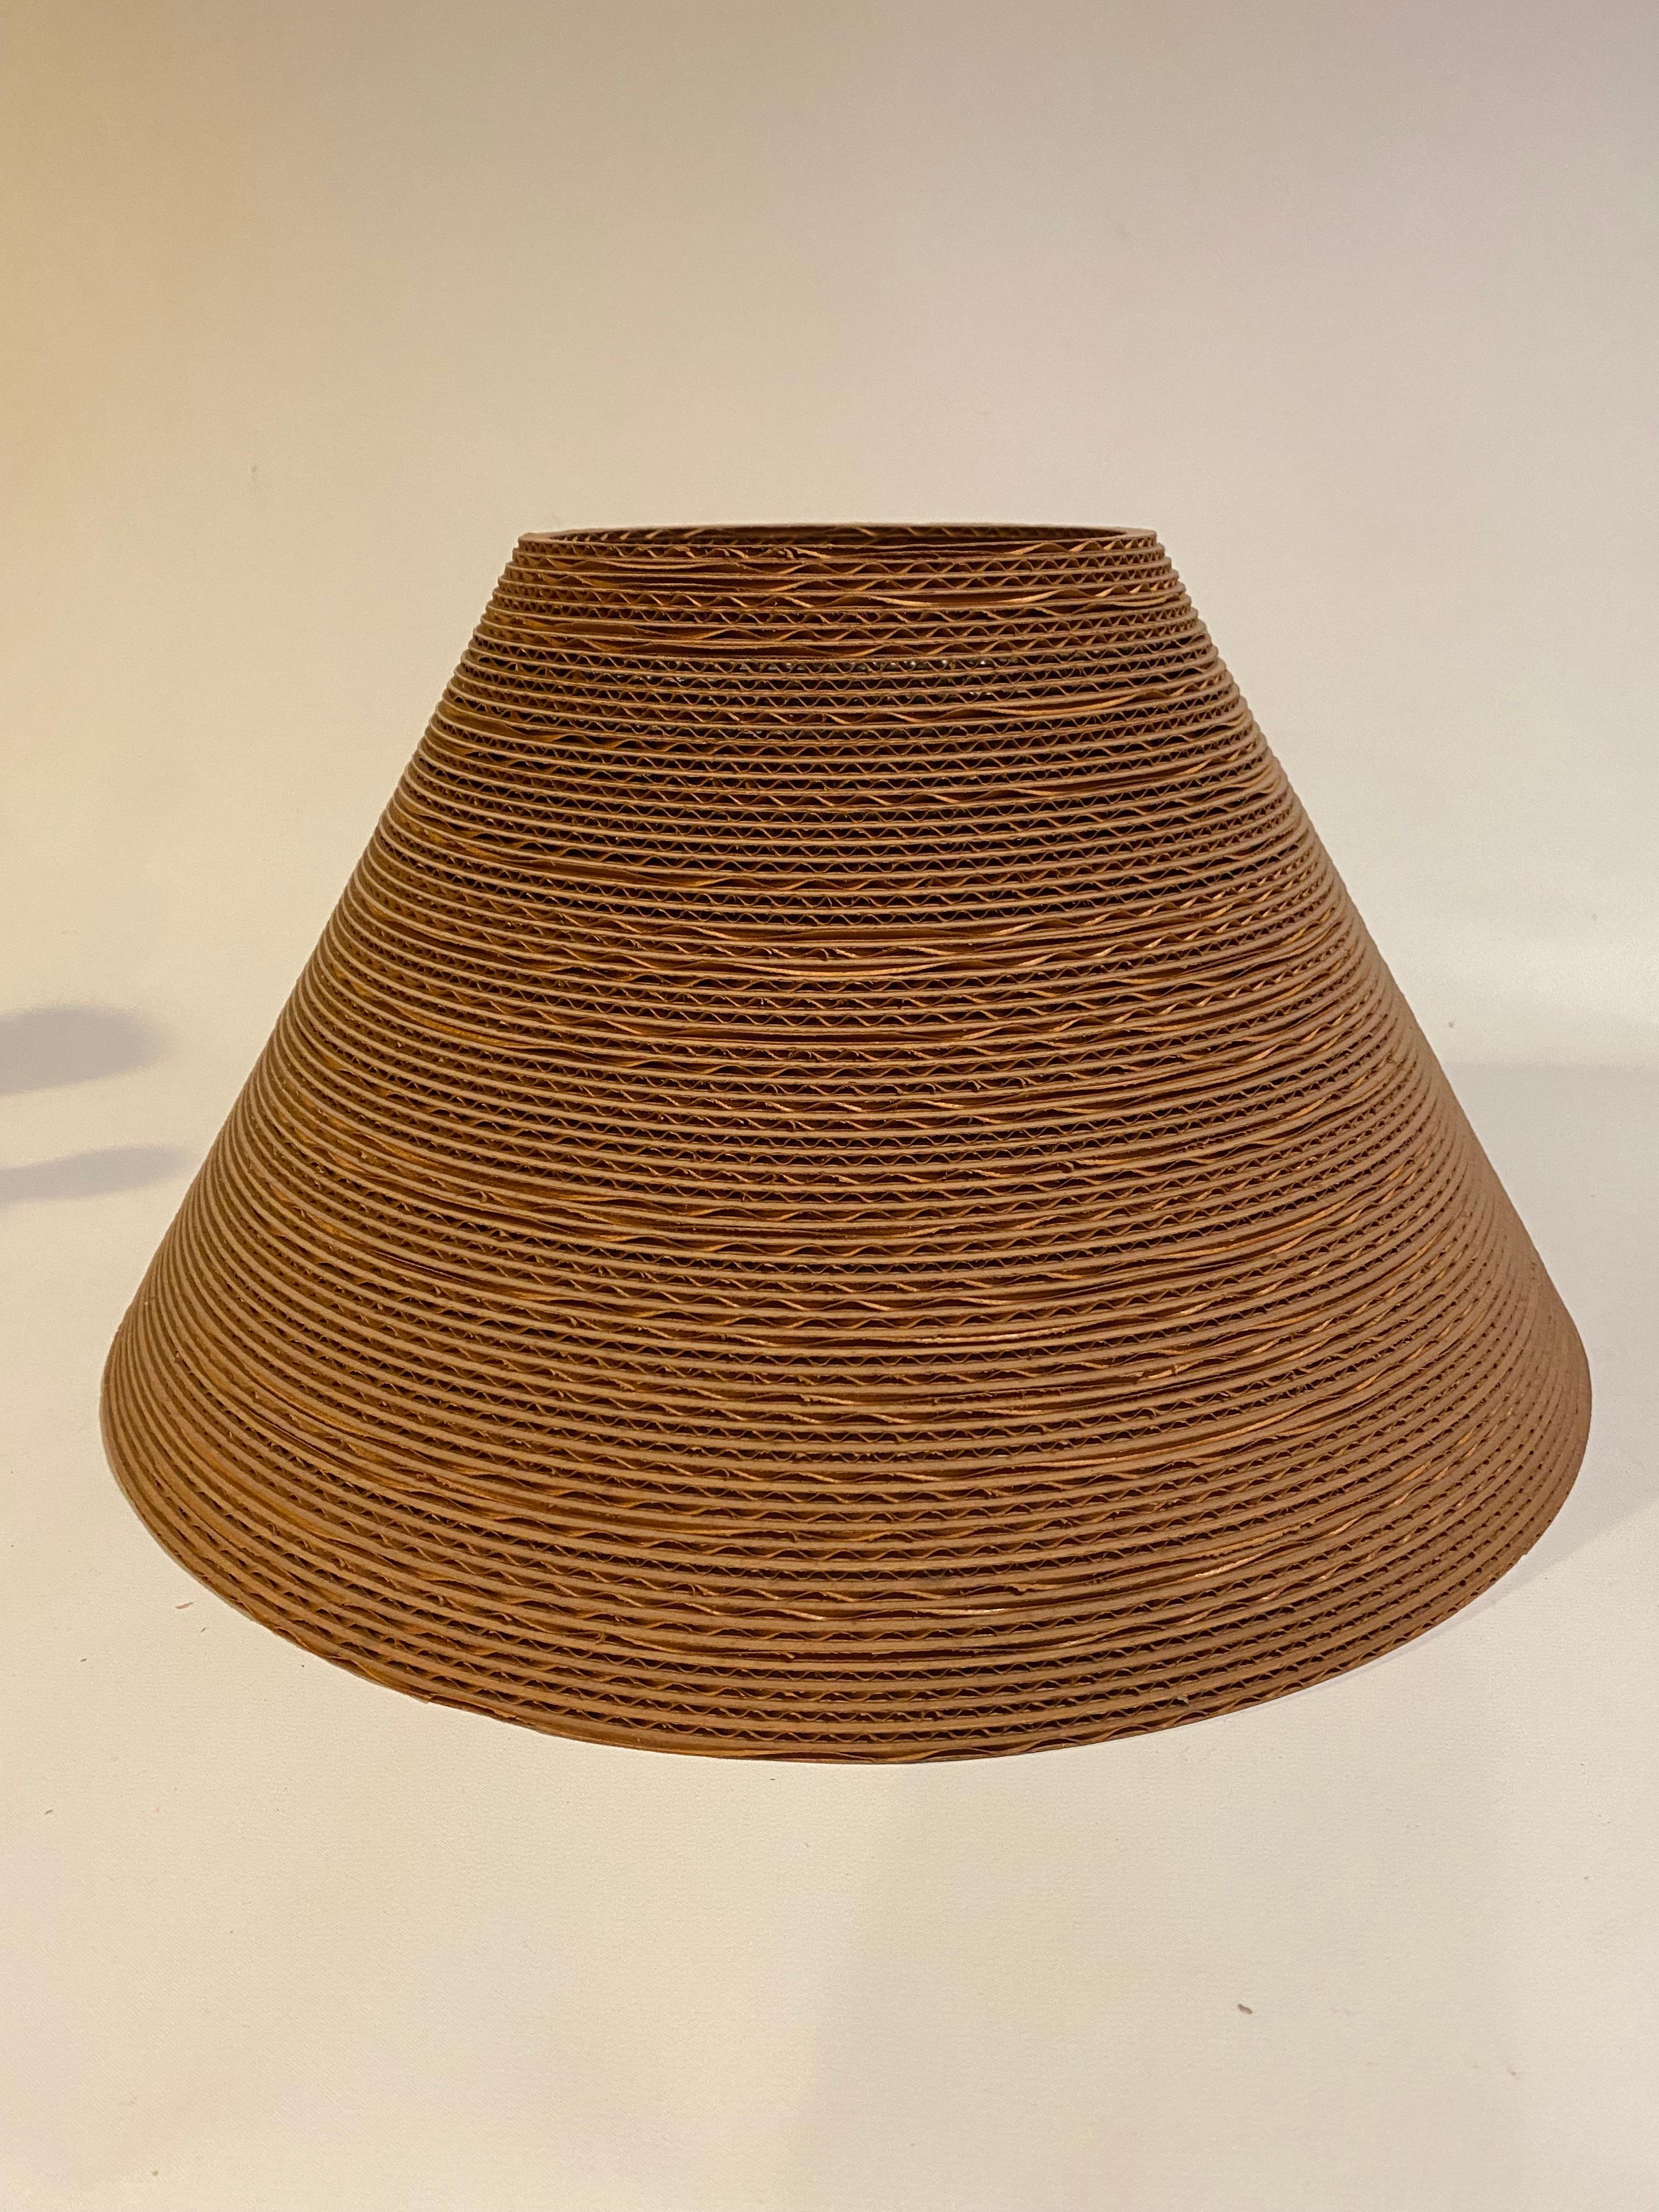 Easy Edges corrugated and layered cardboard lamp shade. A wonderfully imaginative design by the master architect and designer, Frank Gehry. Circa 1970. Great for a Gehry table lamp missing its shade or wired as a hanging pendant light. Good overall